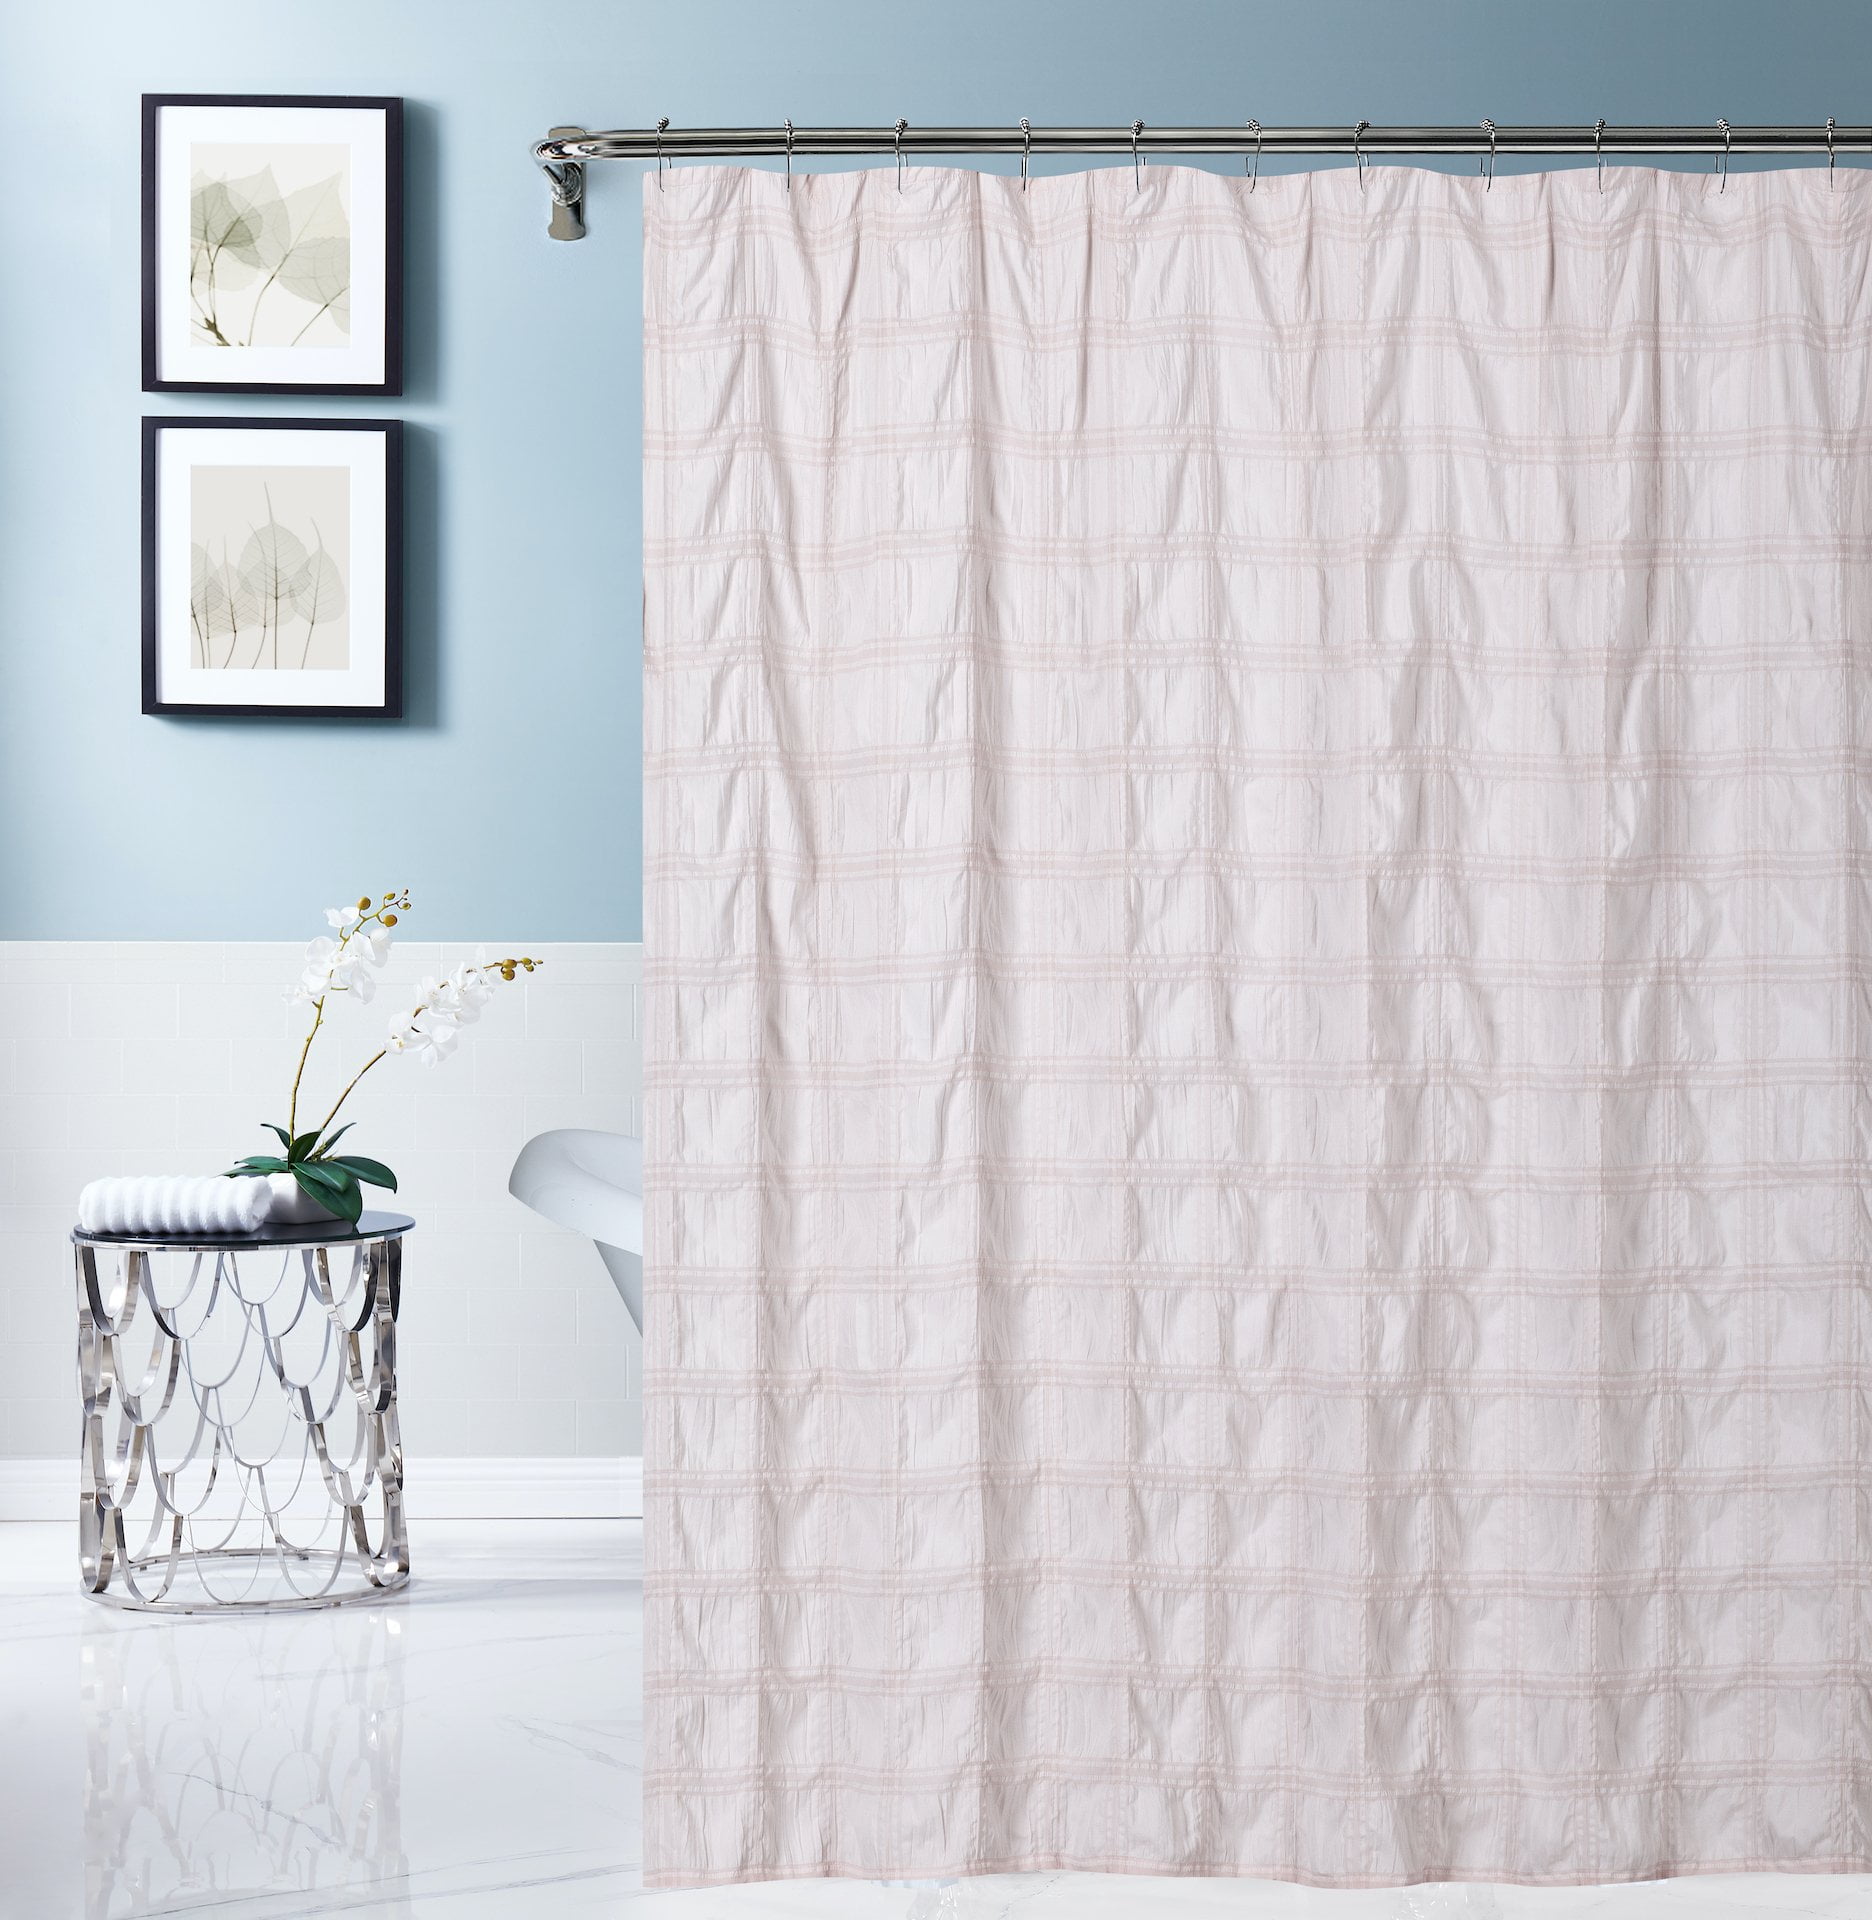 Overseas Palace Waterproof Bath Polyester Shower Curtain Liner Water Resistant 